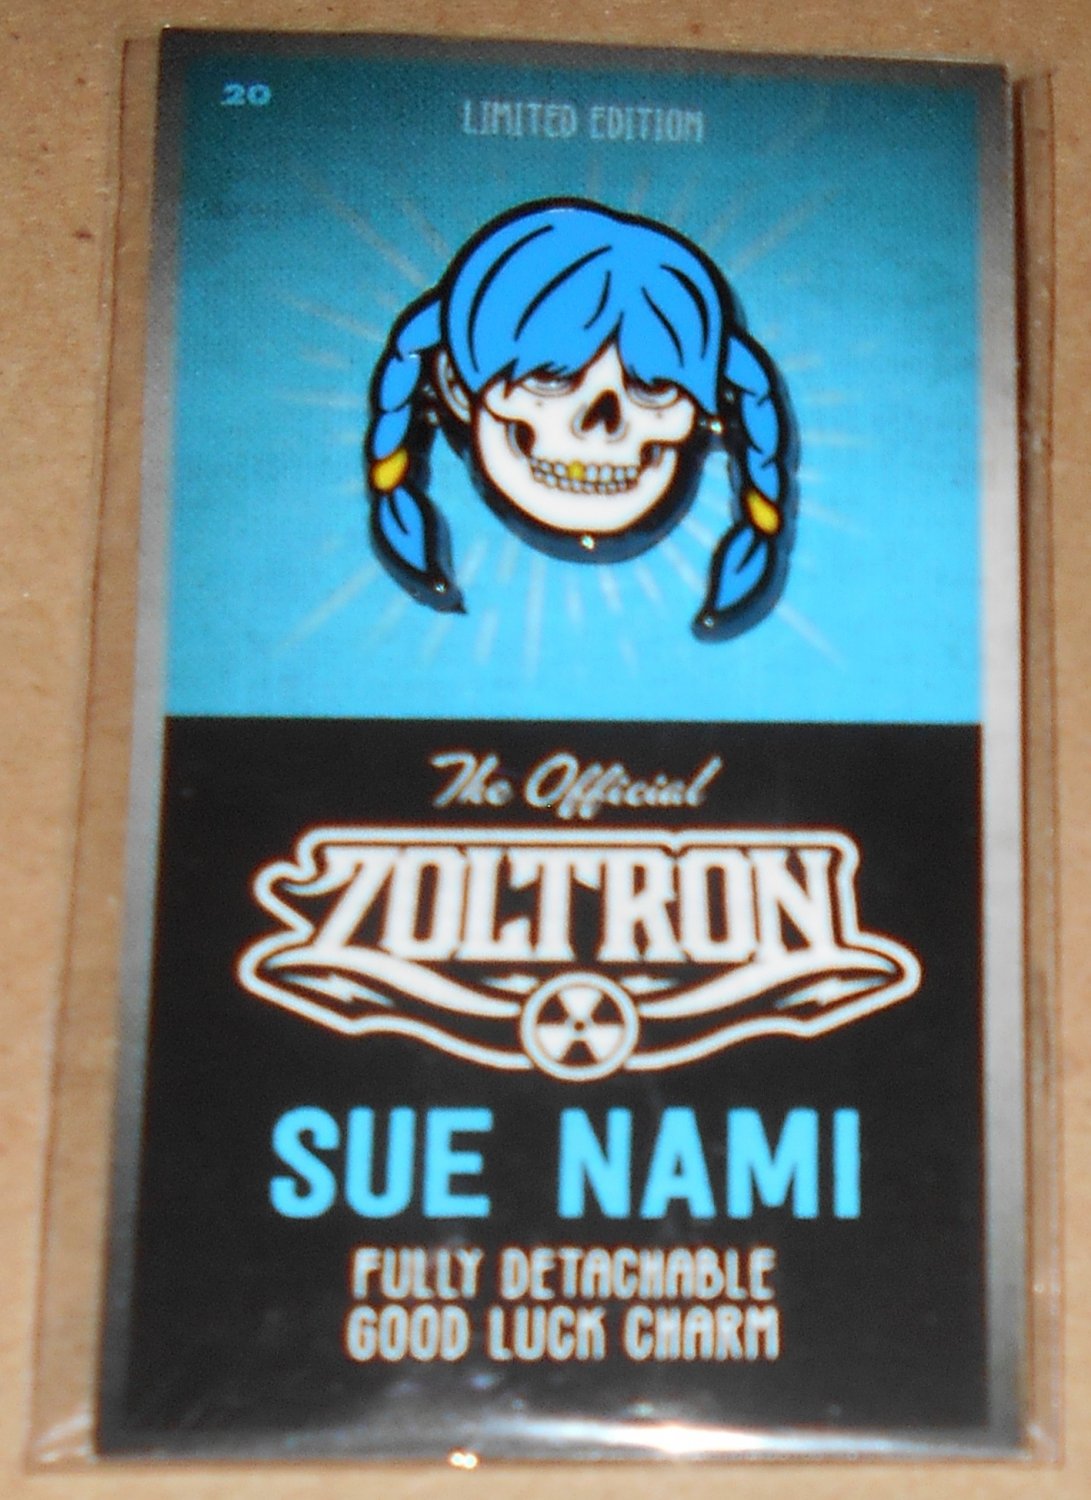 Zoltron Sue Nami Enamel Good Luck Charm Pin Button Limited Edition Art /200 NEW